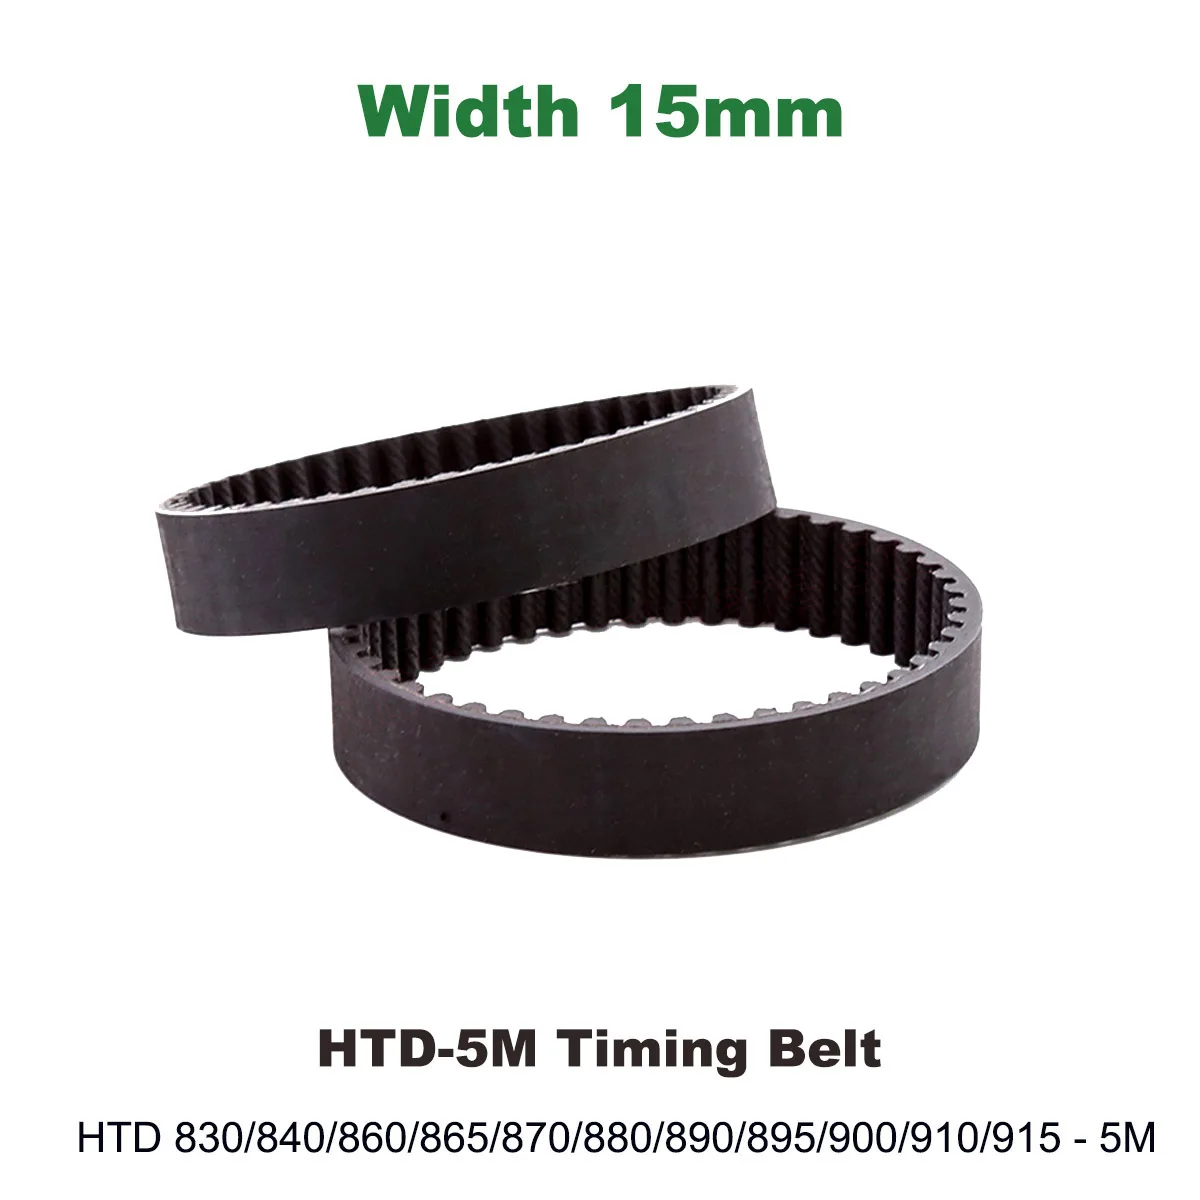 

HTD-5M Timing Belt Width 15mm Rubber HTD5M Synchronous Pulle Length 830/840/860/865/870/880/890/895/900/910/915mm Closed Loop